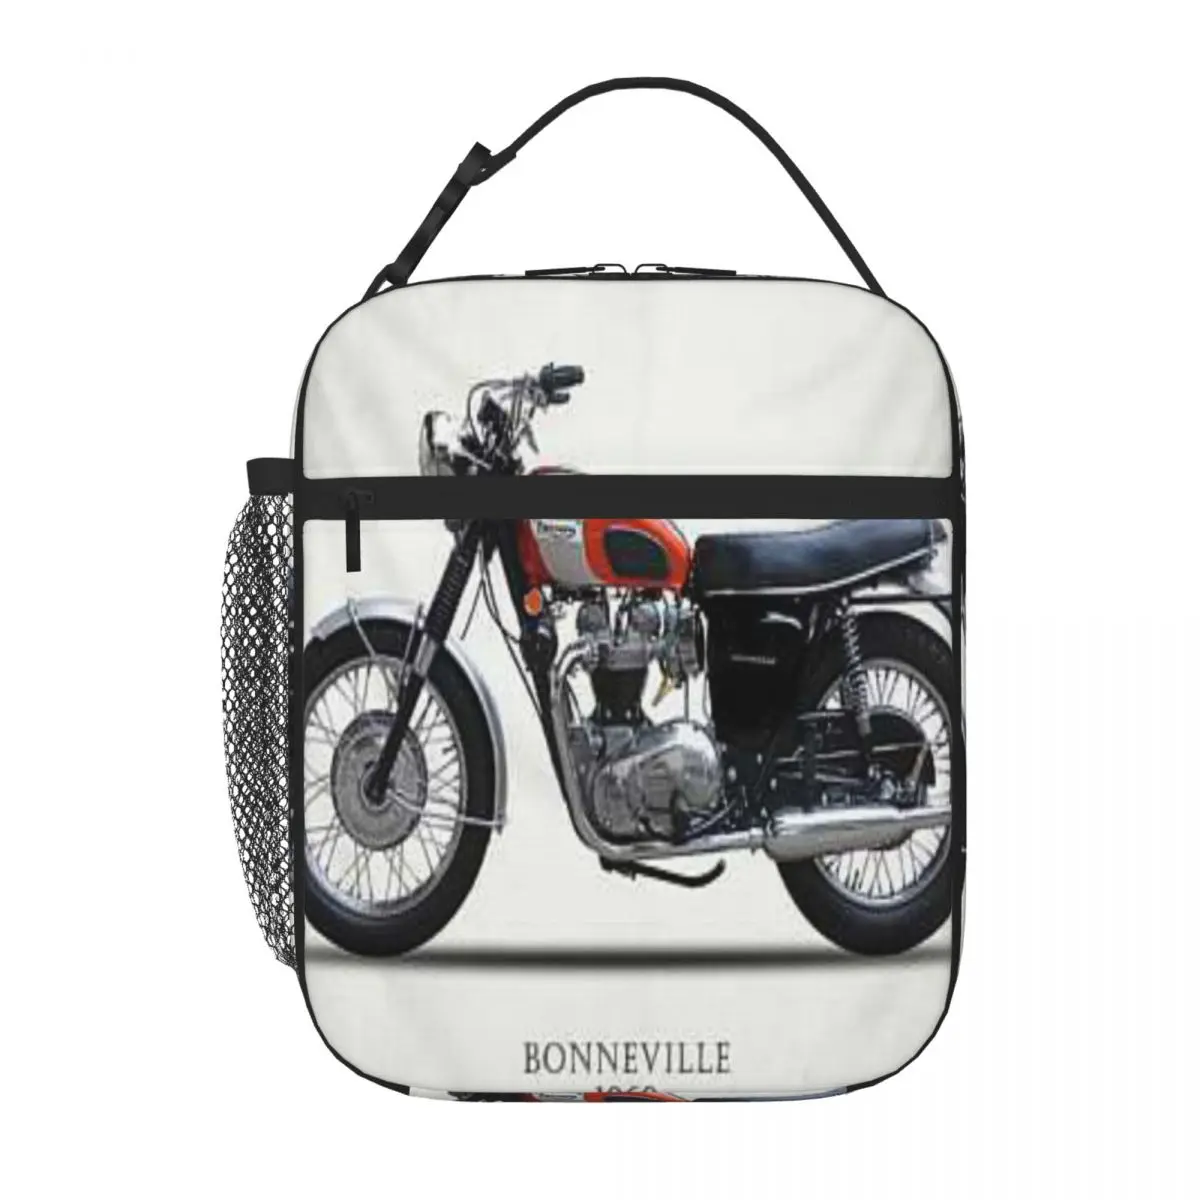 

The 1969 Bonneville Mark Rogan Lunch Tote Lunch Bag Thermal Lunchbox Insulated Lunch Box